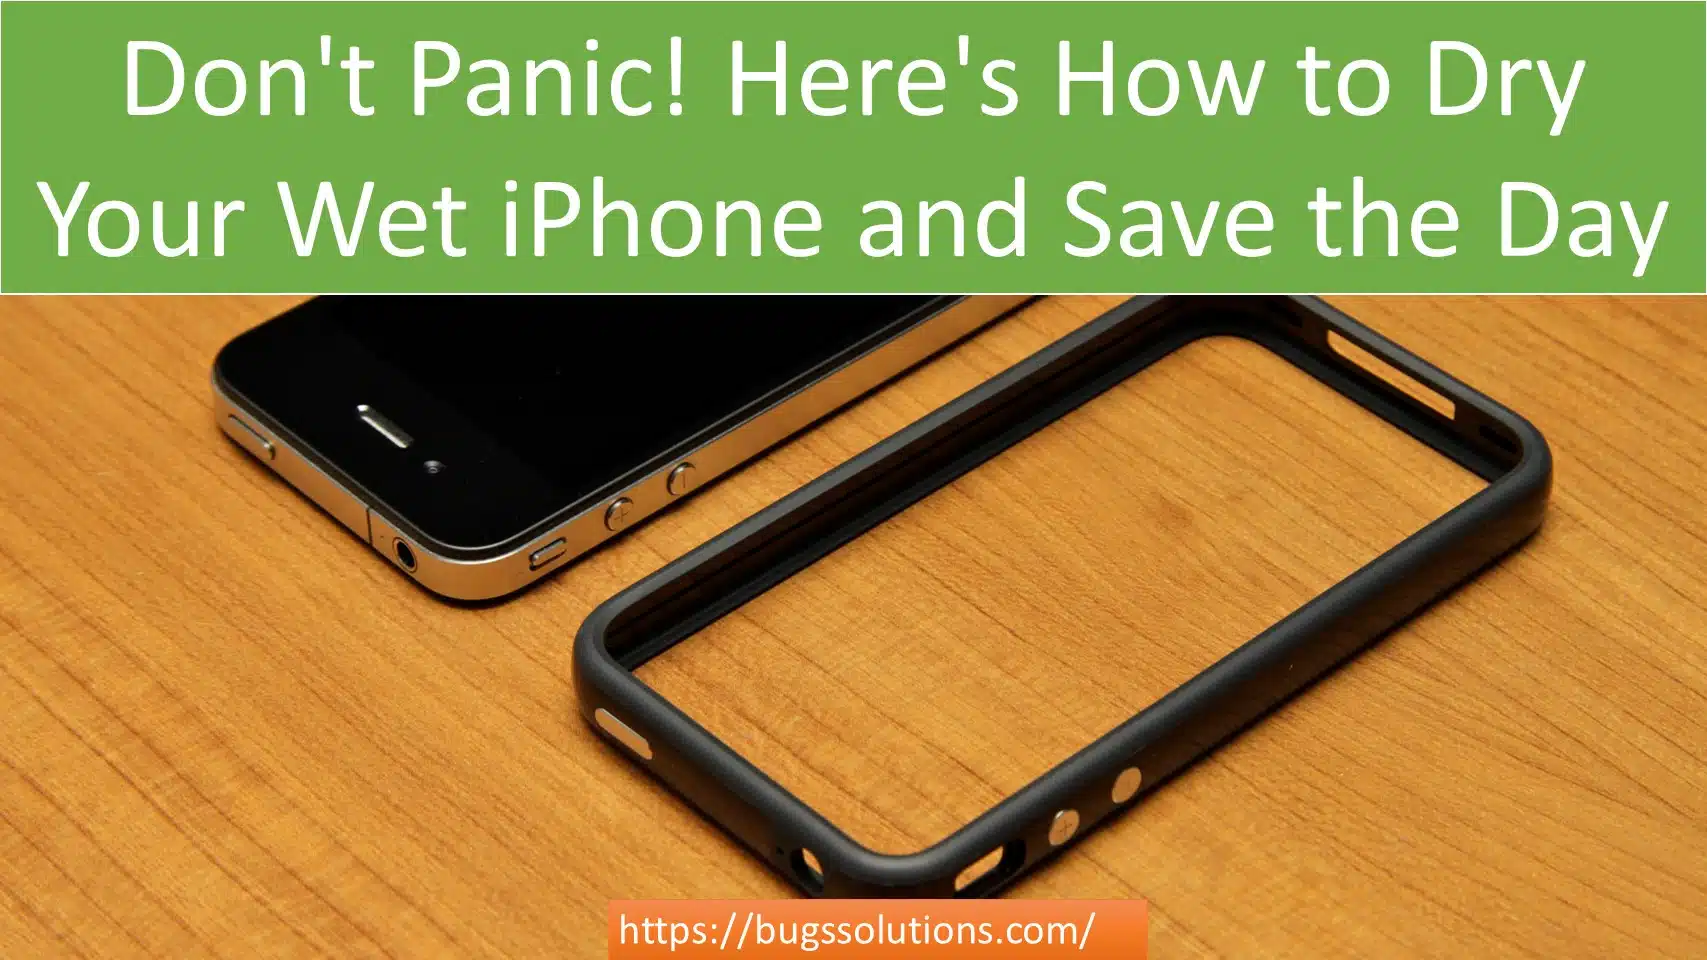 Don't Panic! Here's How to Dry Your Wet iPhone and Save the Day